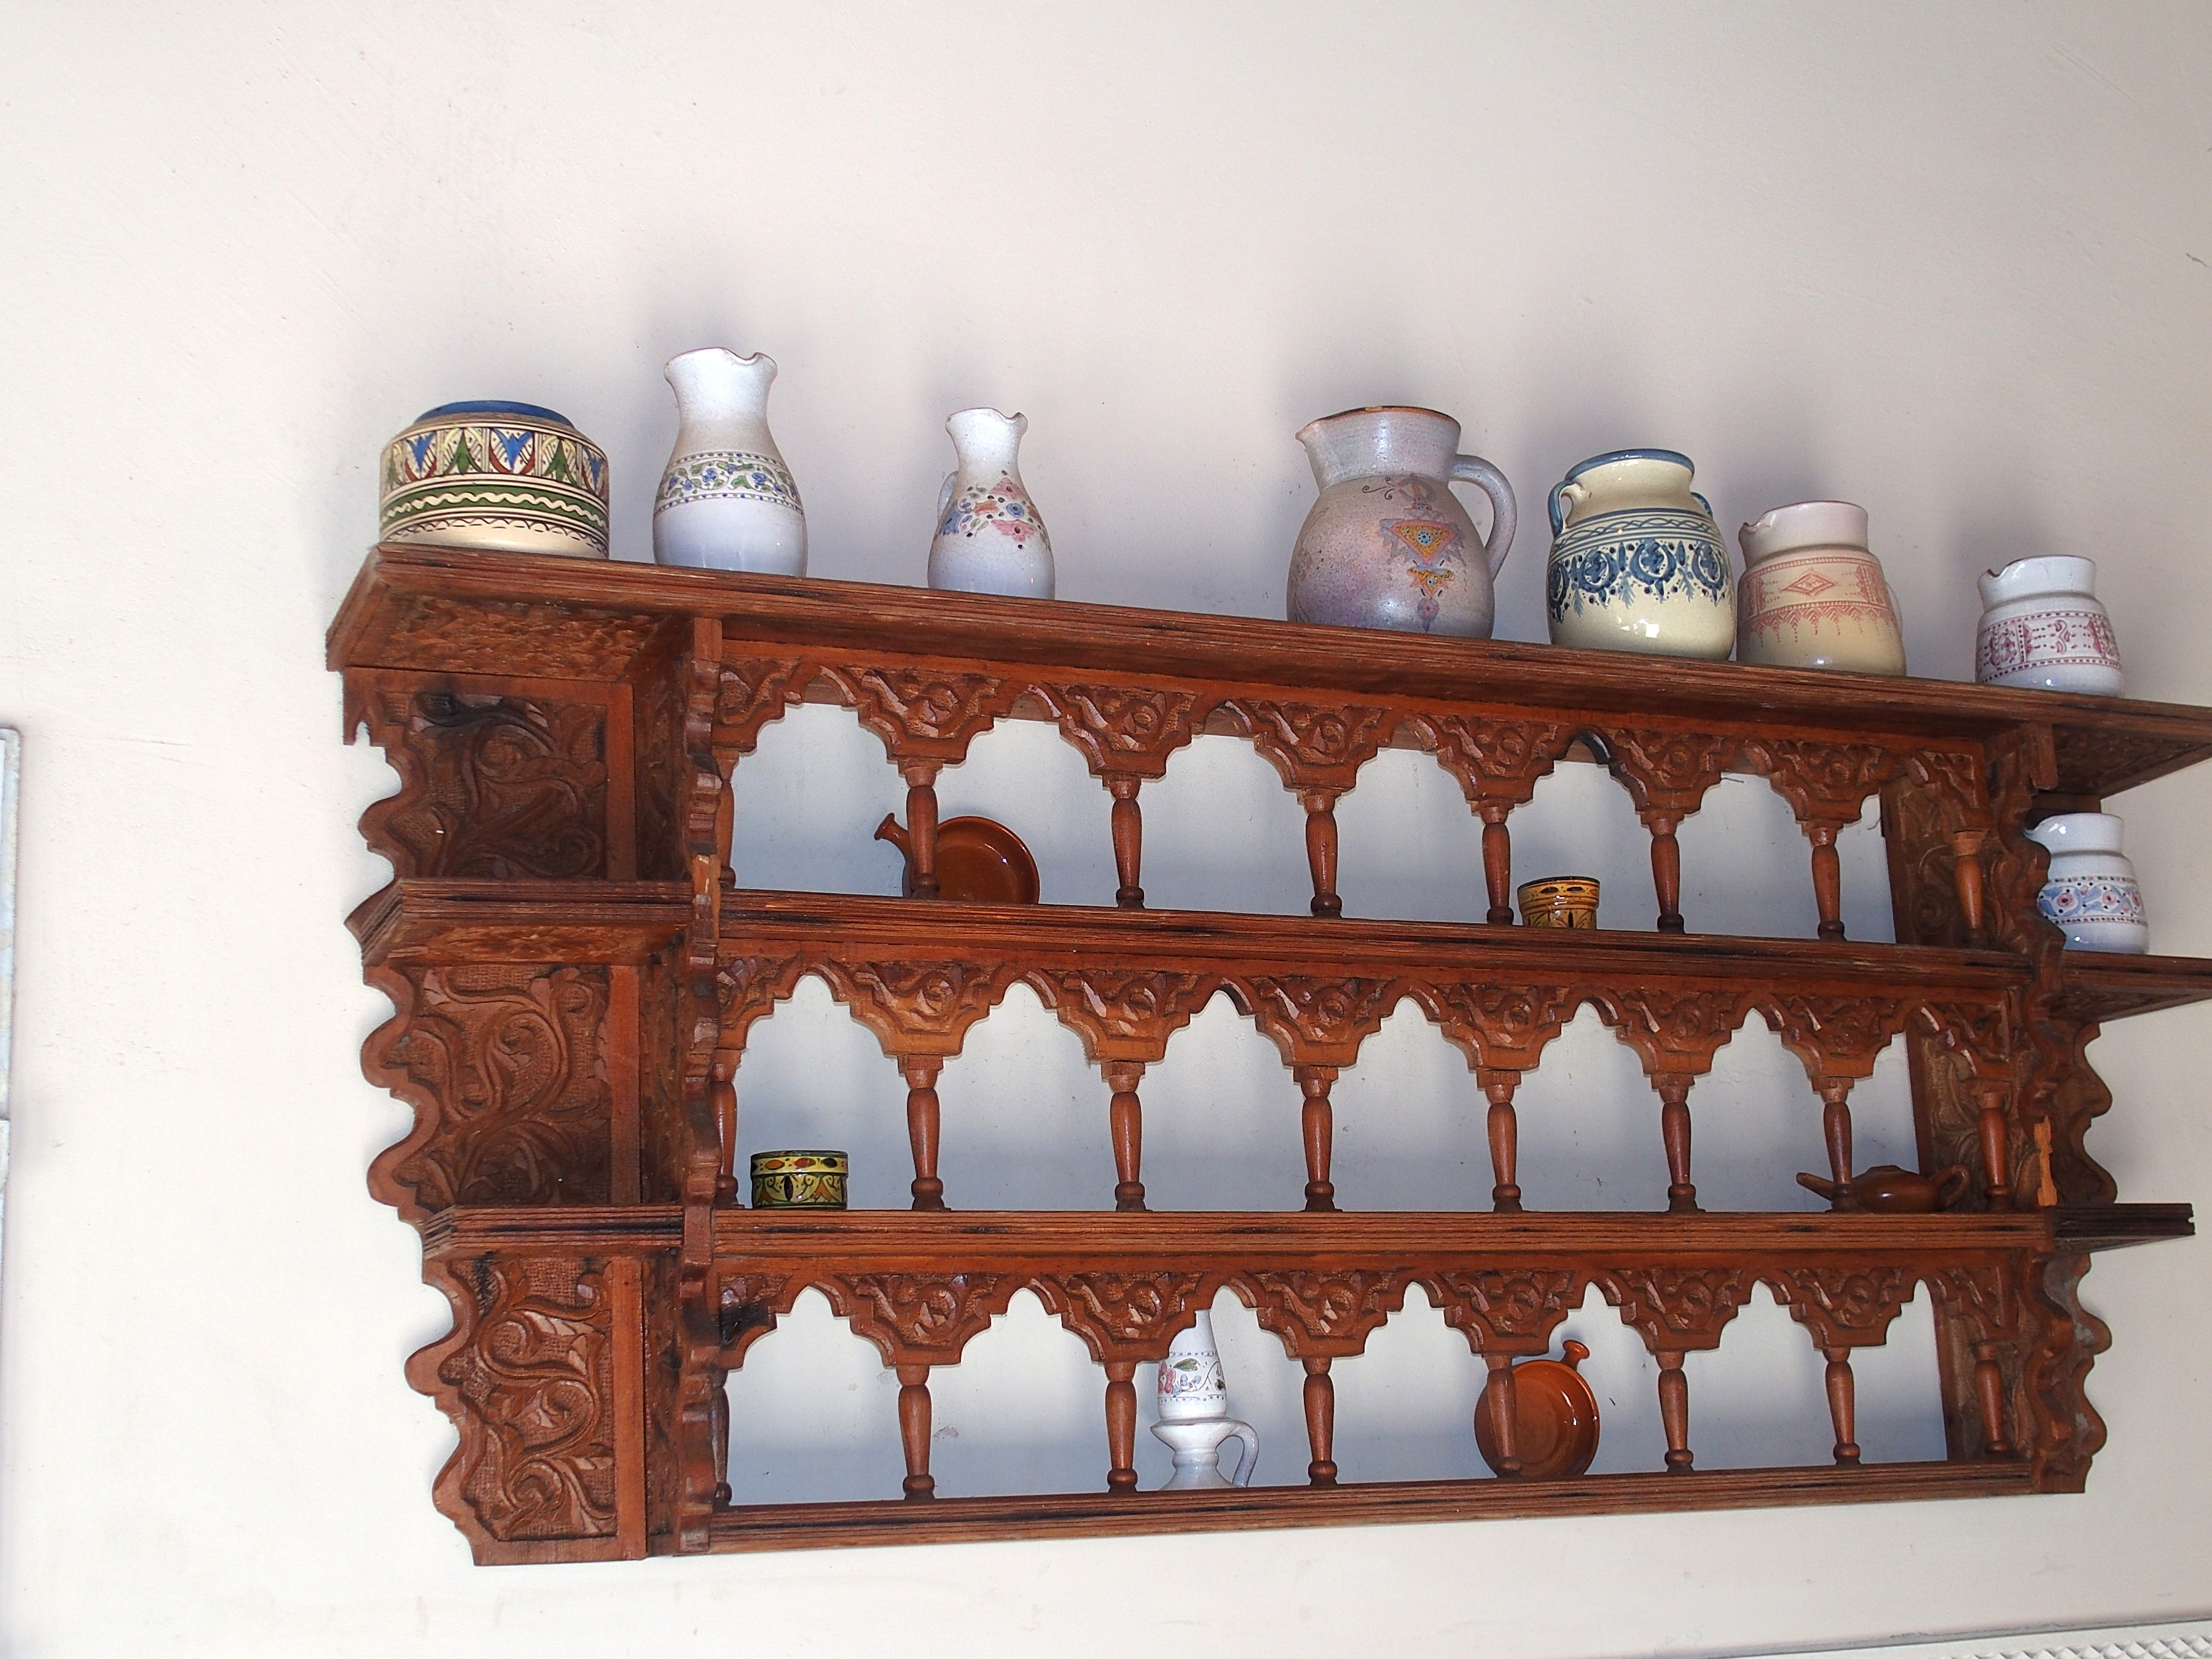 Moroccan jars and shelves